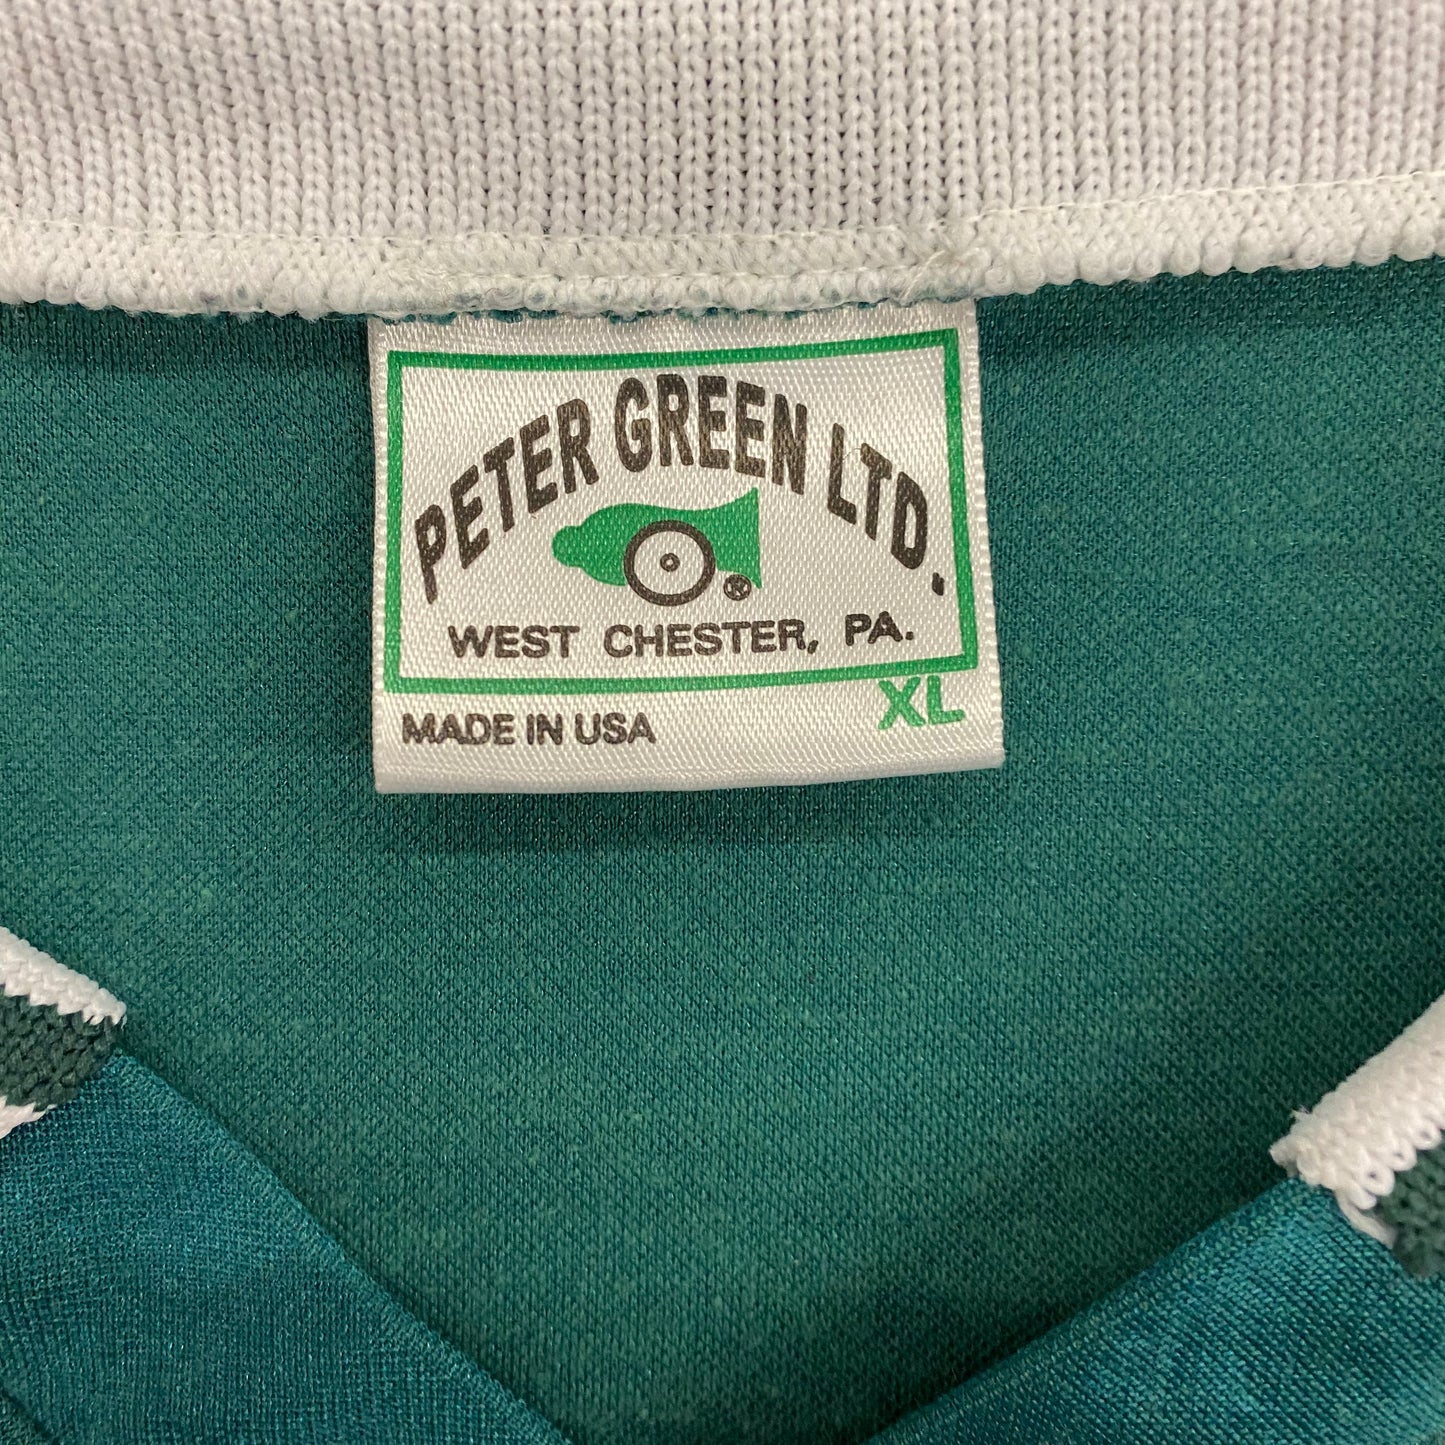 Vintage 90s Westside S.C. Green Collared Soccer Jersey - Size XL